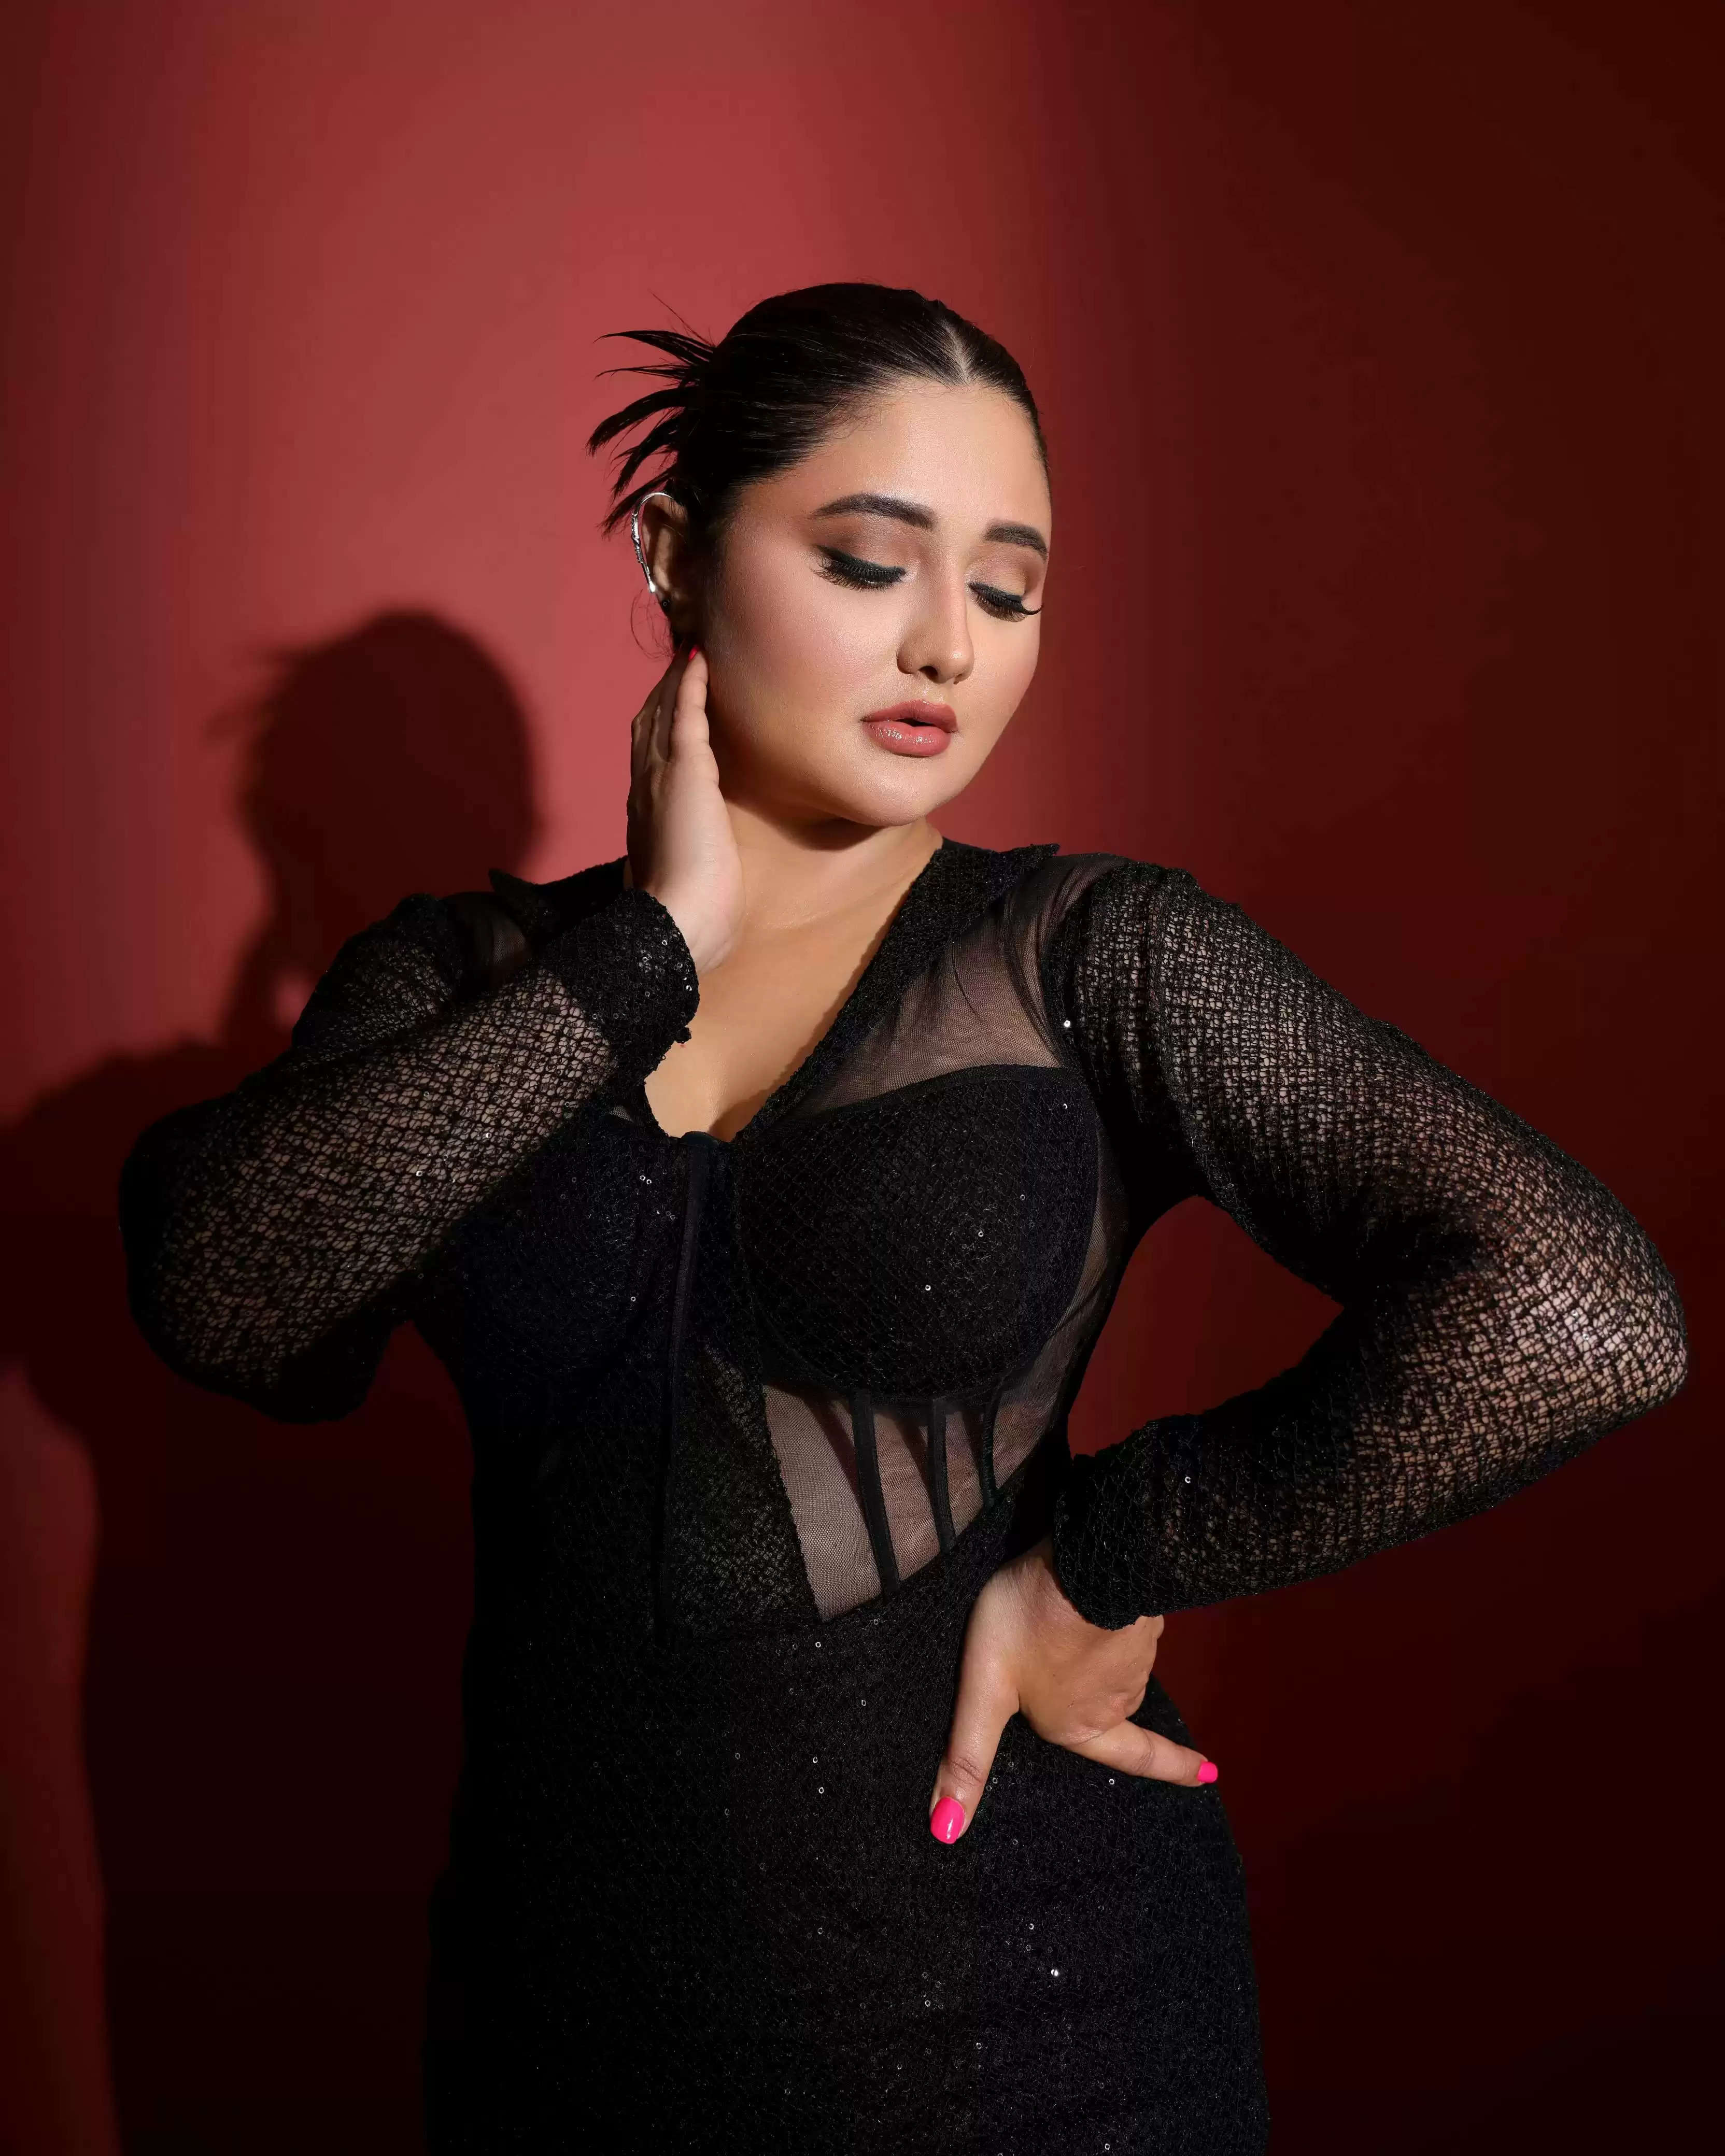 Transforming for the screen: Rashami Desai's physical and mental preparation for diverse roles